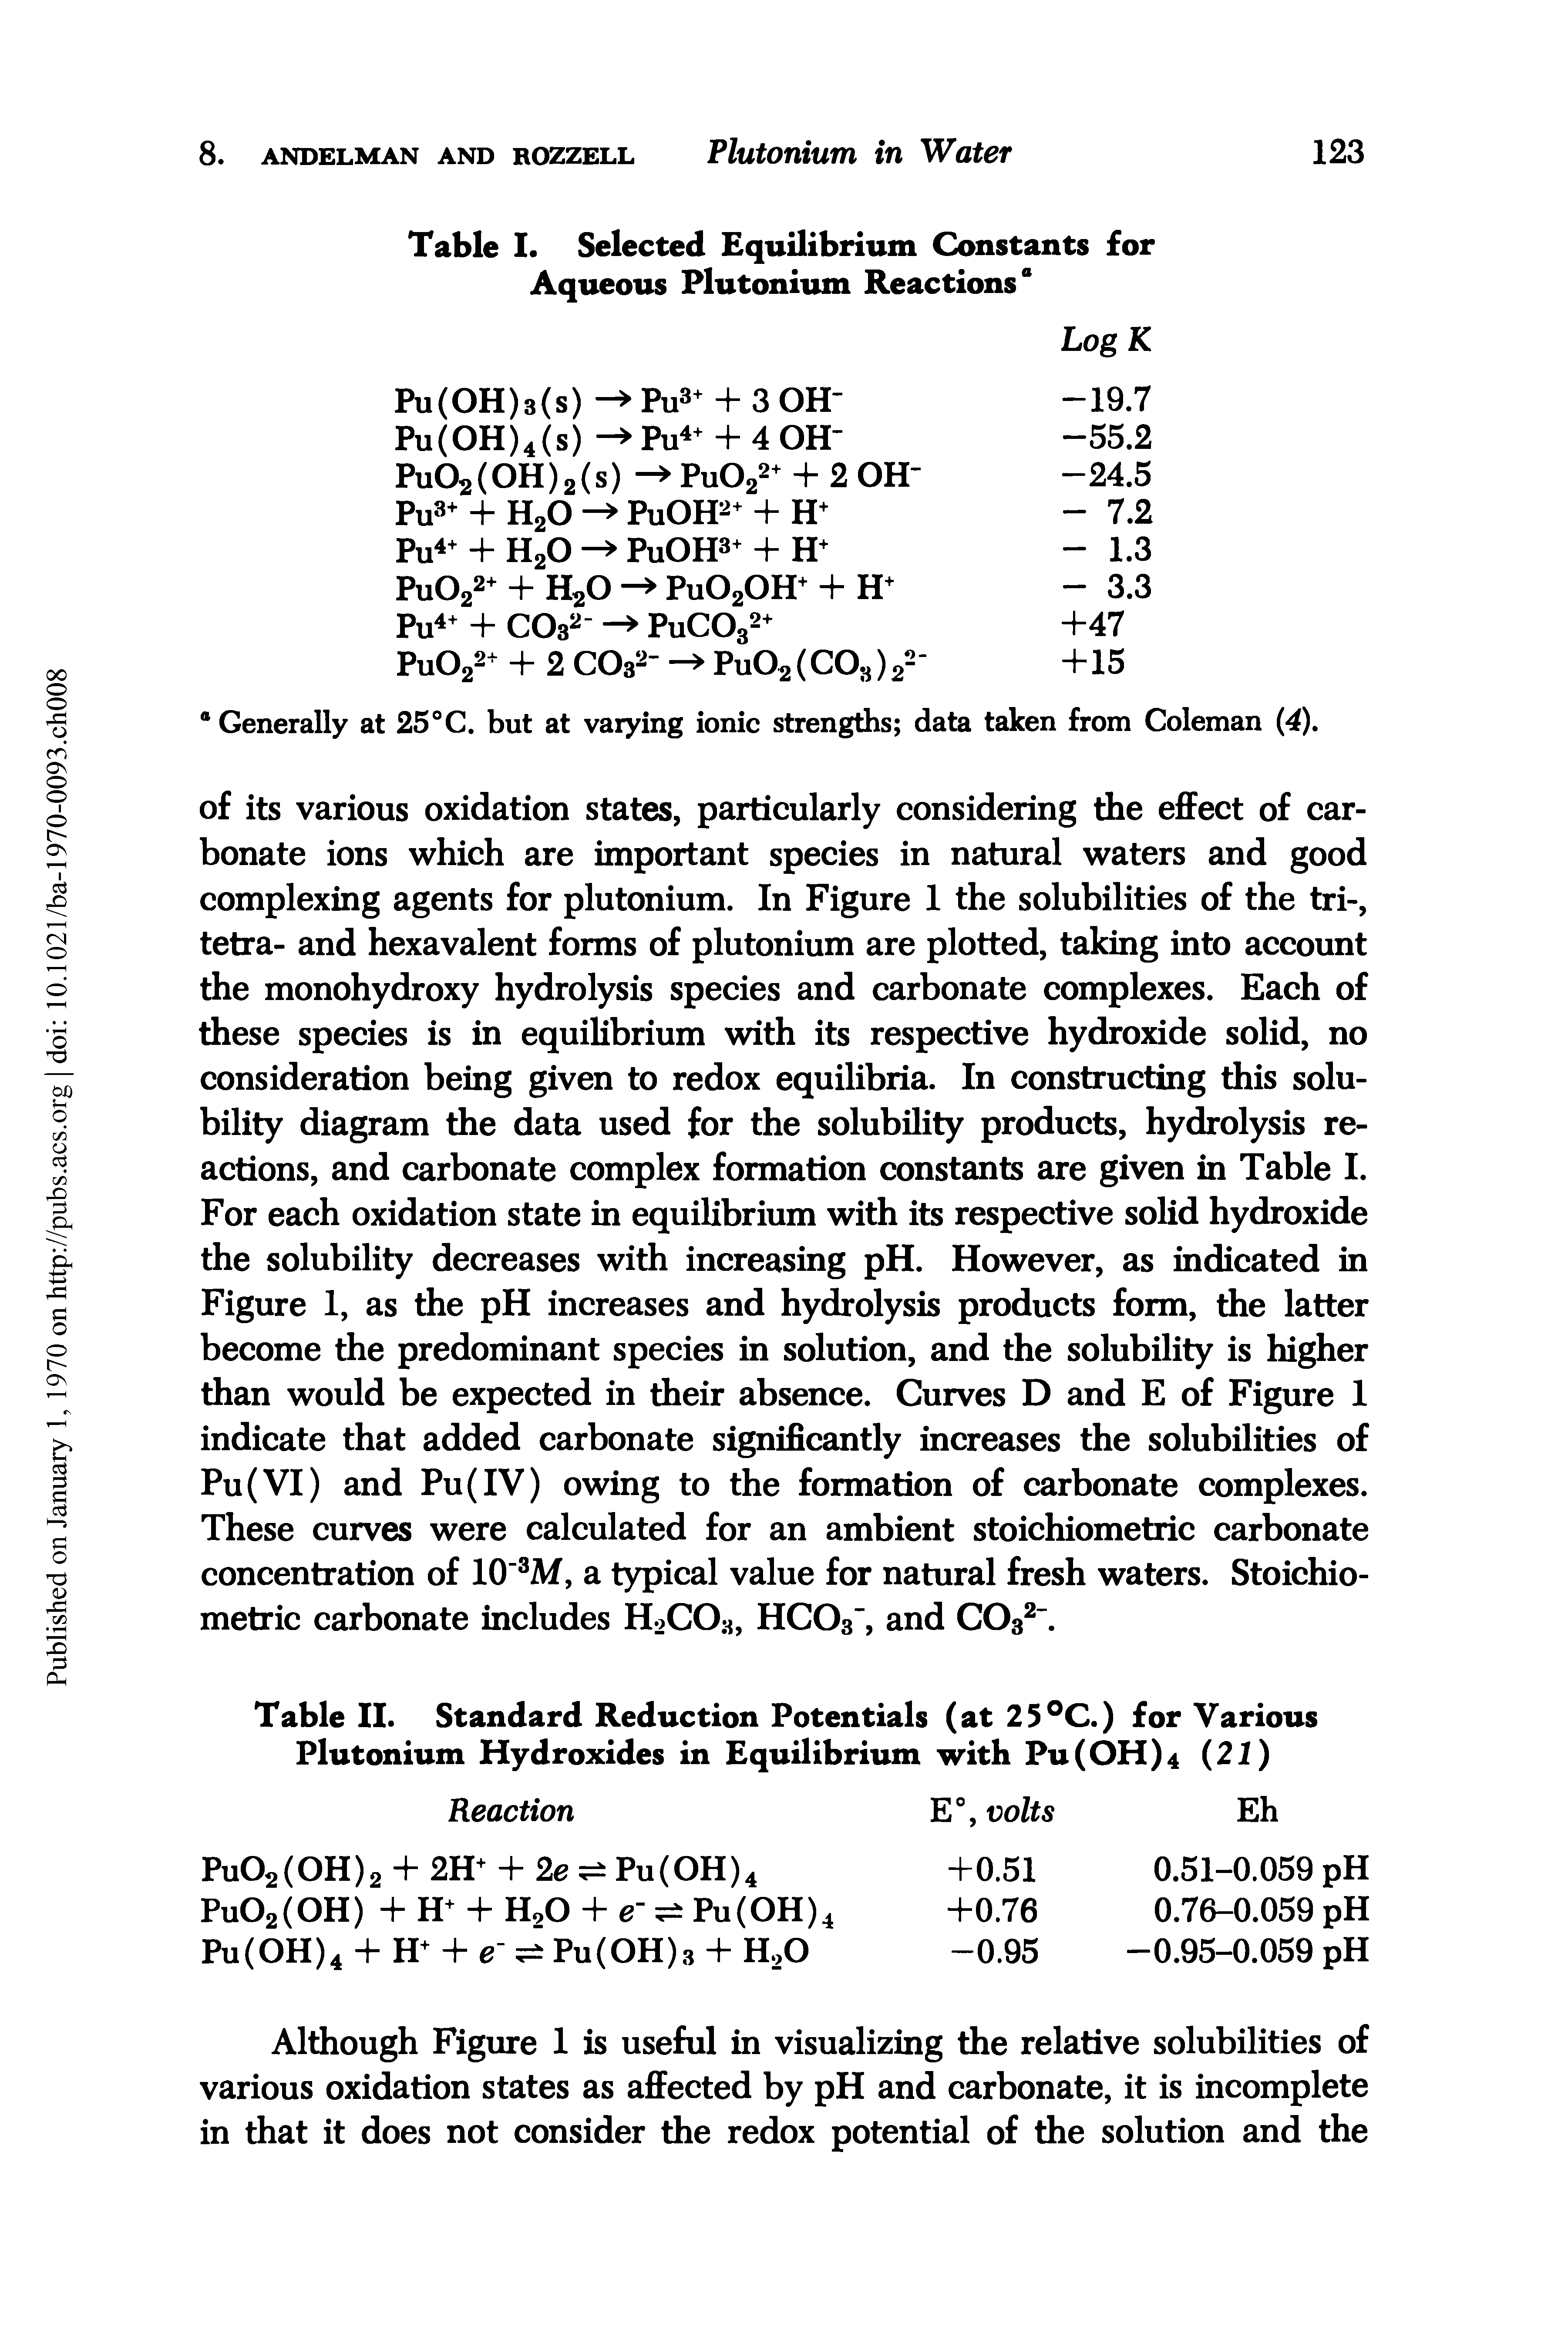 Table II. Standard Reduction Potentials (at 25°C.) for Various Plutonium Hydroxides in Equilibrium with Pu(OH)4 (21)...